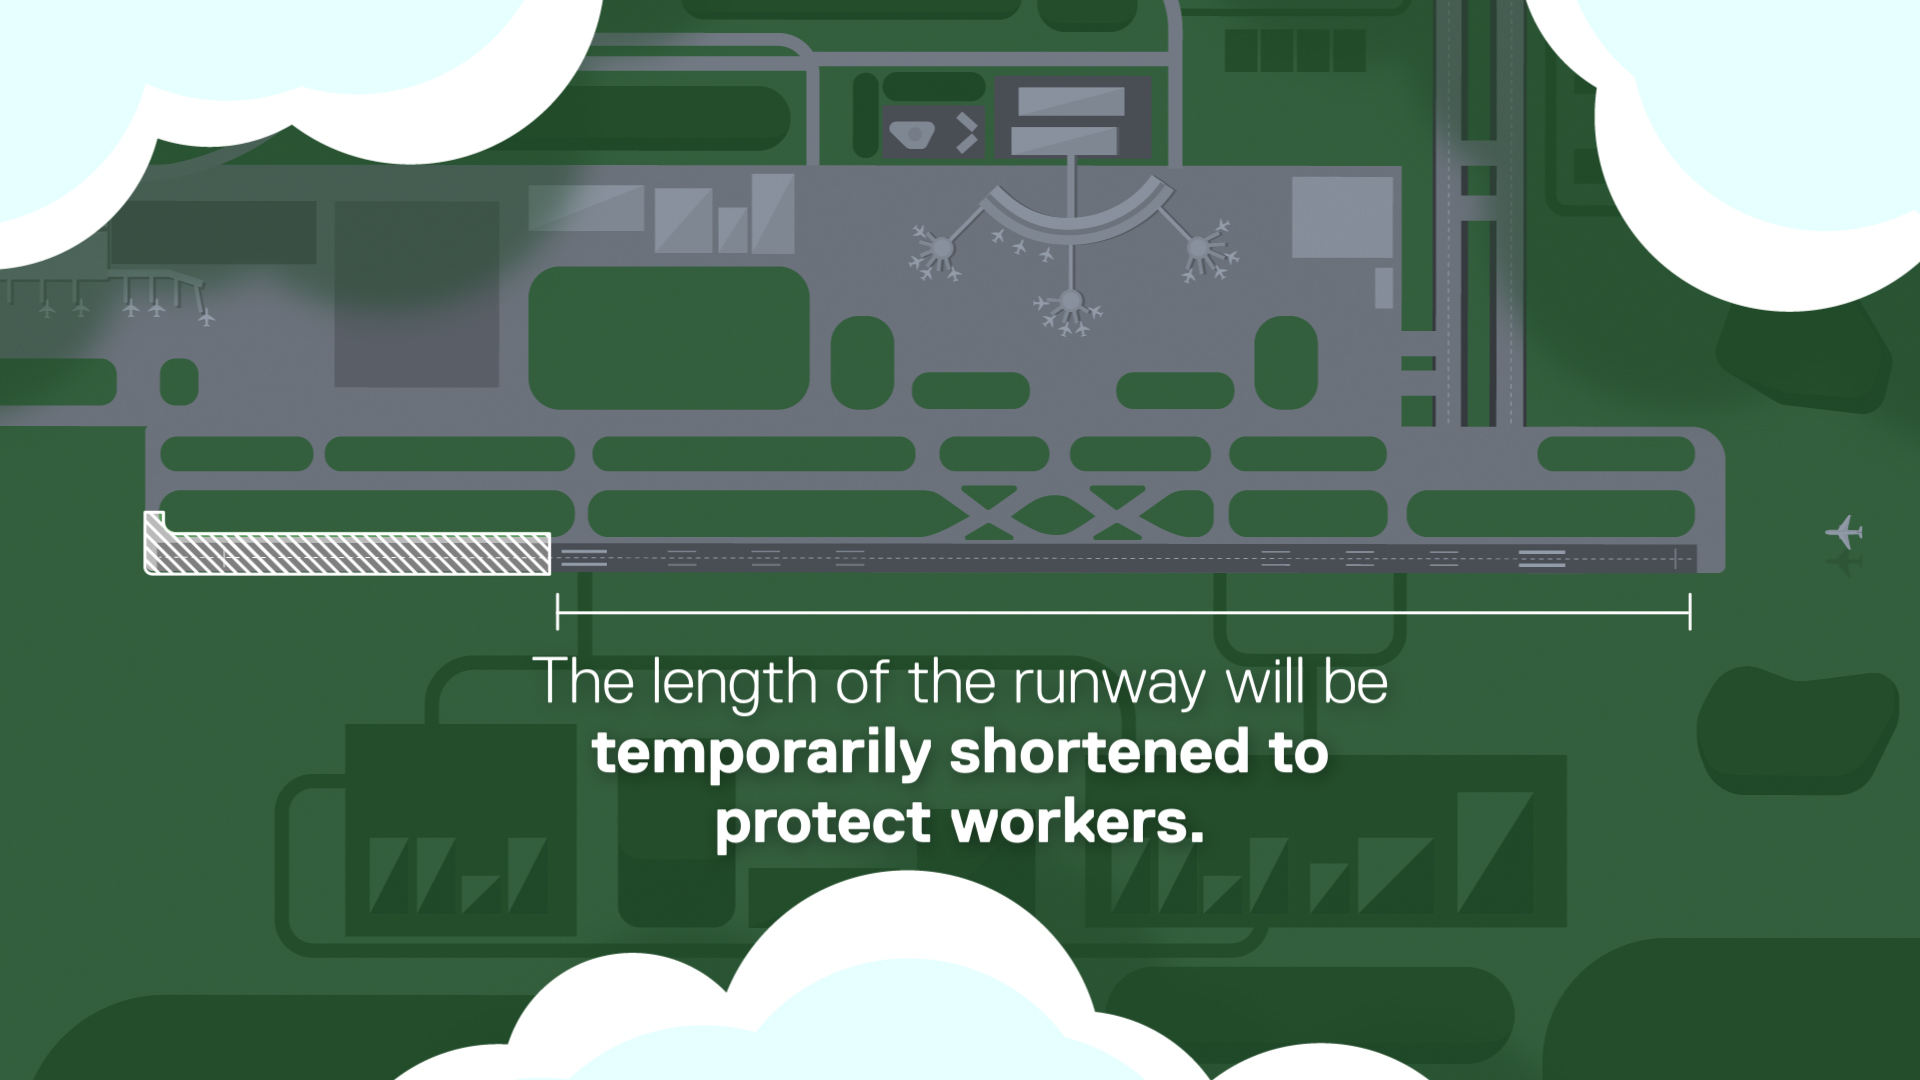 Animation showing the how the runway will be shortened